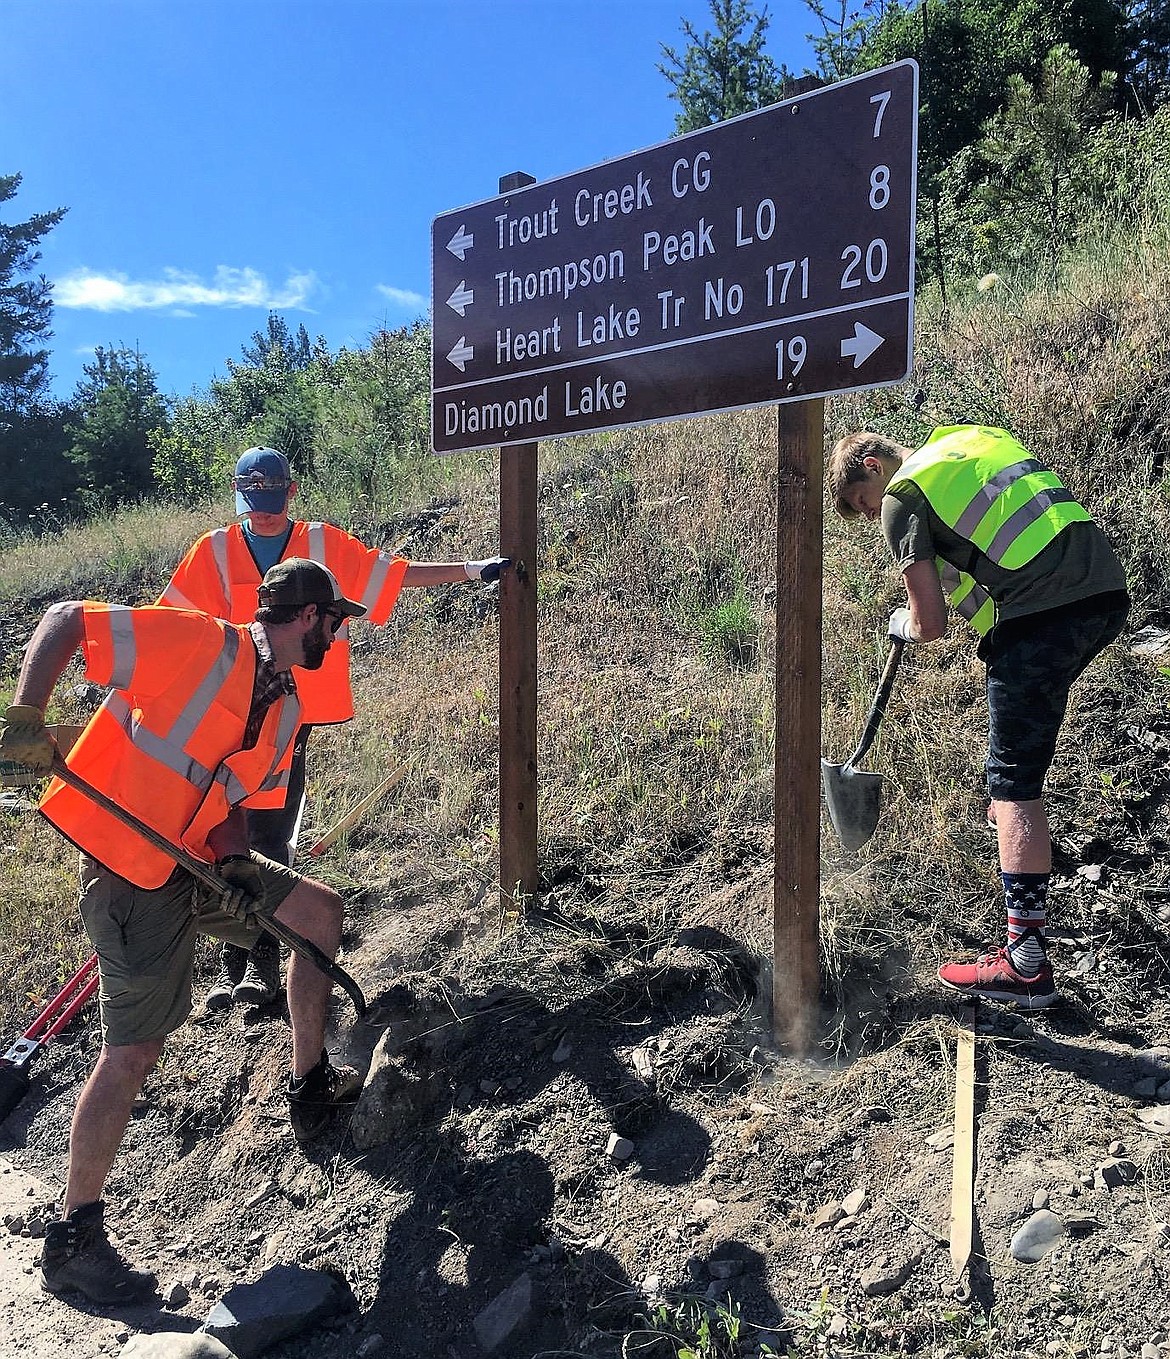 Boy Scouts and members from a local church group helped Neil Mondava install signs for the Superior Forest Service District. The project was part of Mondava&#146;s work to become an Eagle Scout. (Photo courtesy of Neil Mondava)